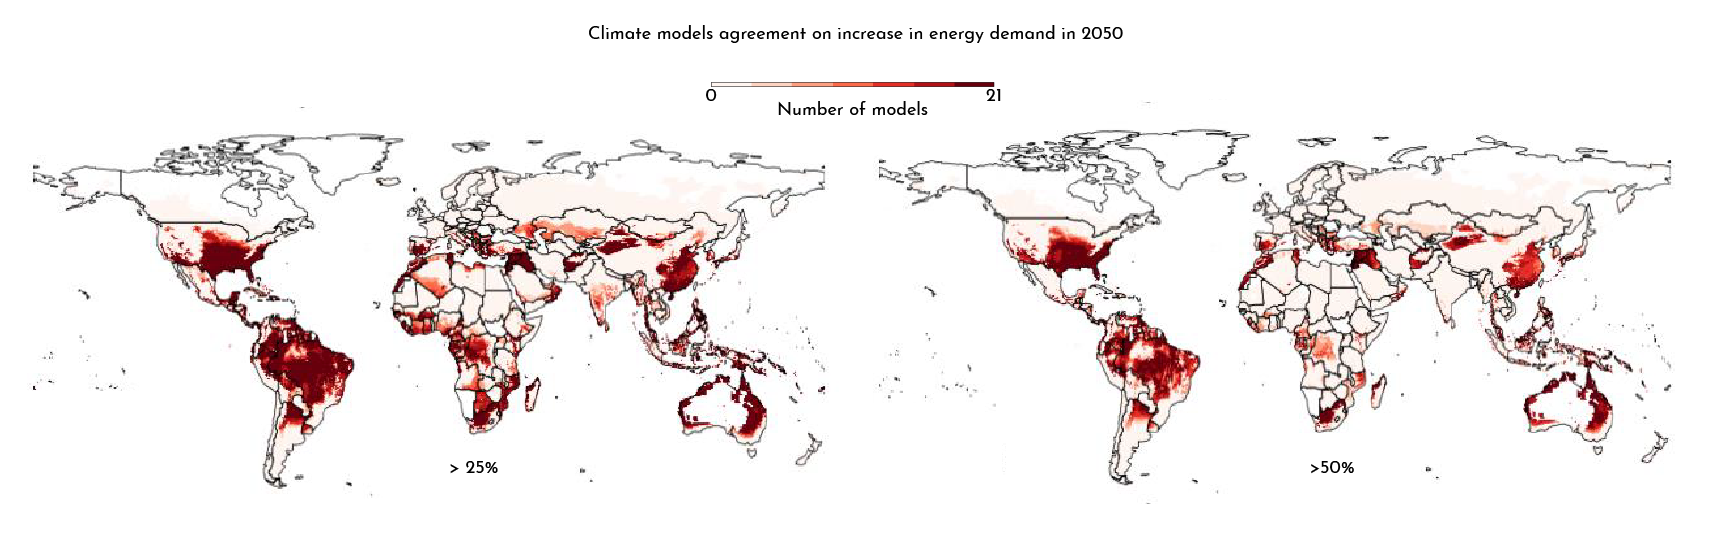 Energy demand response to climate shocks in 2050